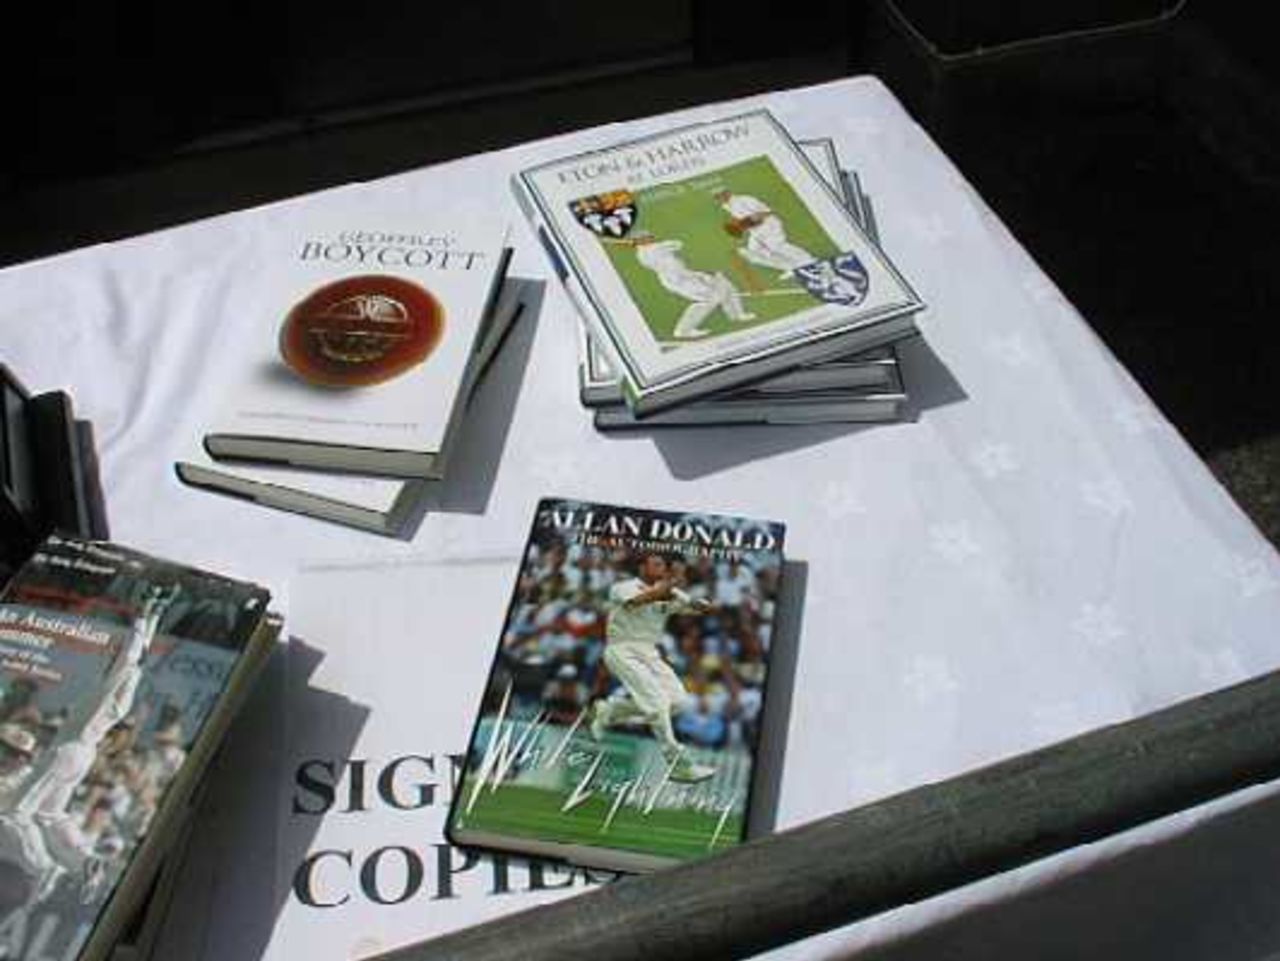 Allan Donald's only unsigned and unsold autobiography at the Oval, WC99 4 June 1999